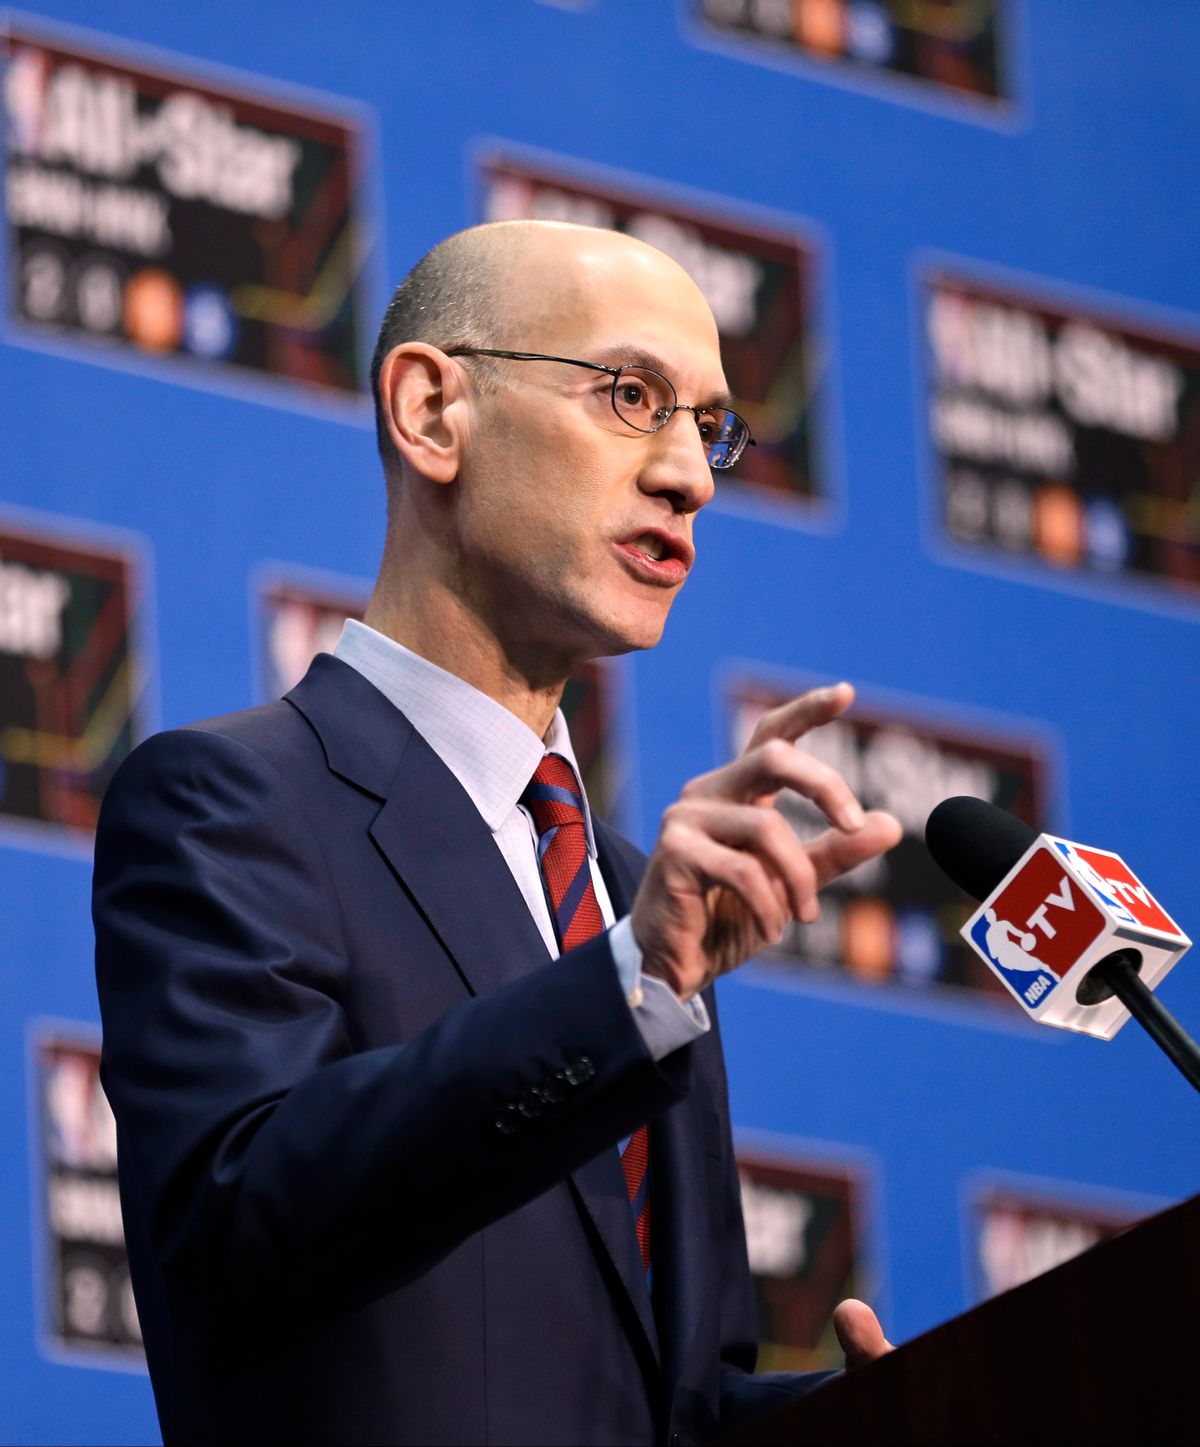 NBA Commissioner Adam Silver speaks during a news conference before the NBA All-Star Saturday events, Feb. 14, 2015, in New York.  (AP Photo/Frank Franklin II) (AP)